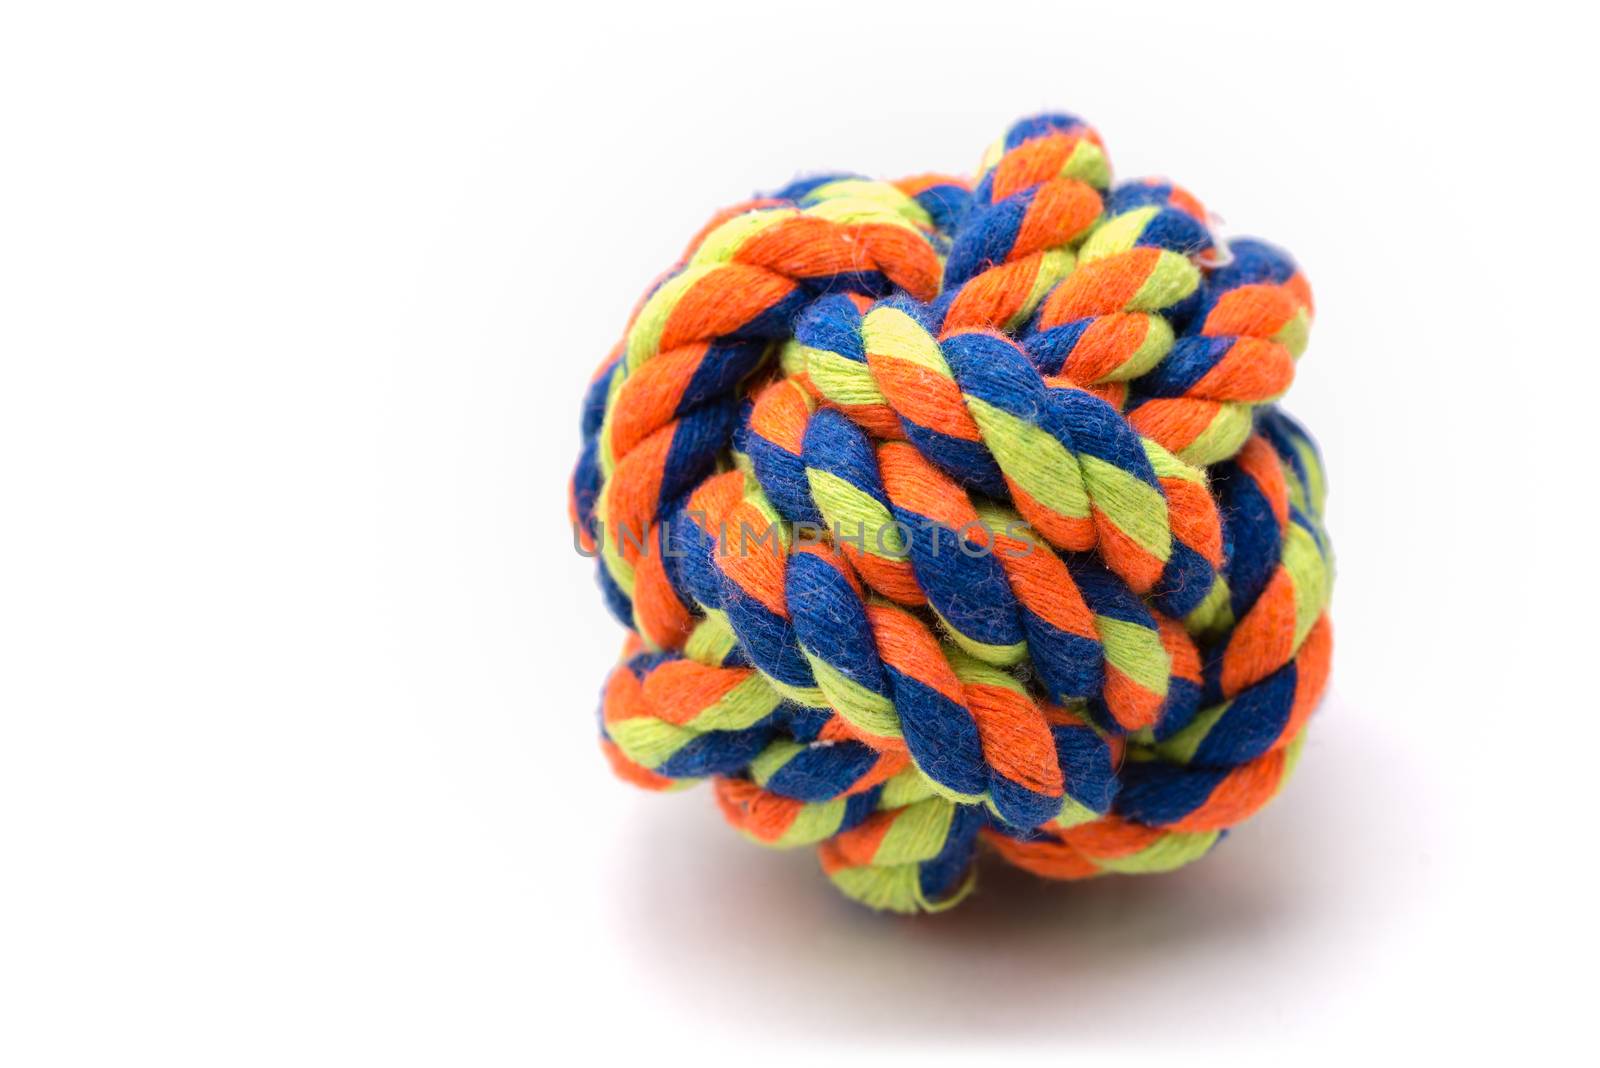 A very colorful ball made from rope tied in a monkey's fist knot used for a dog's toy.